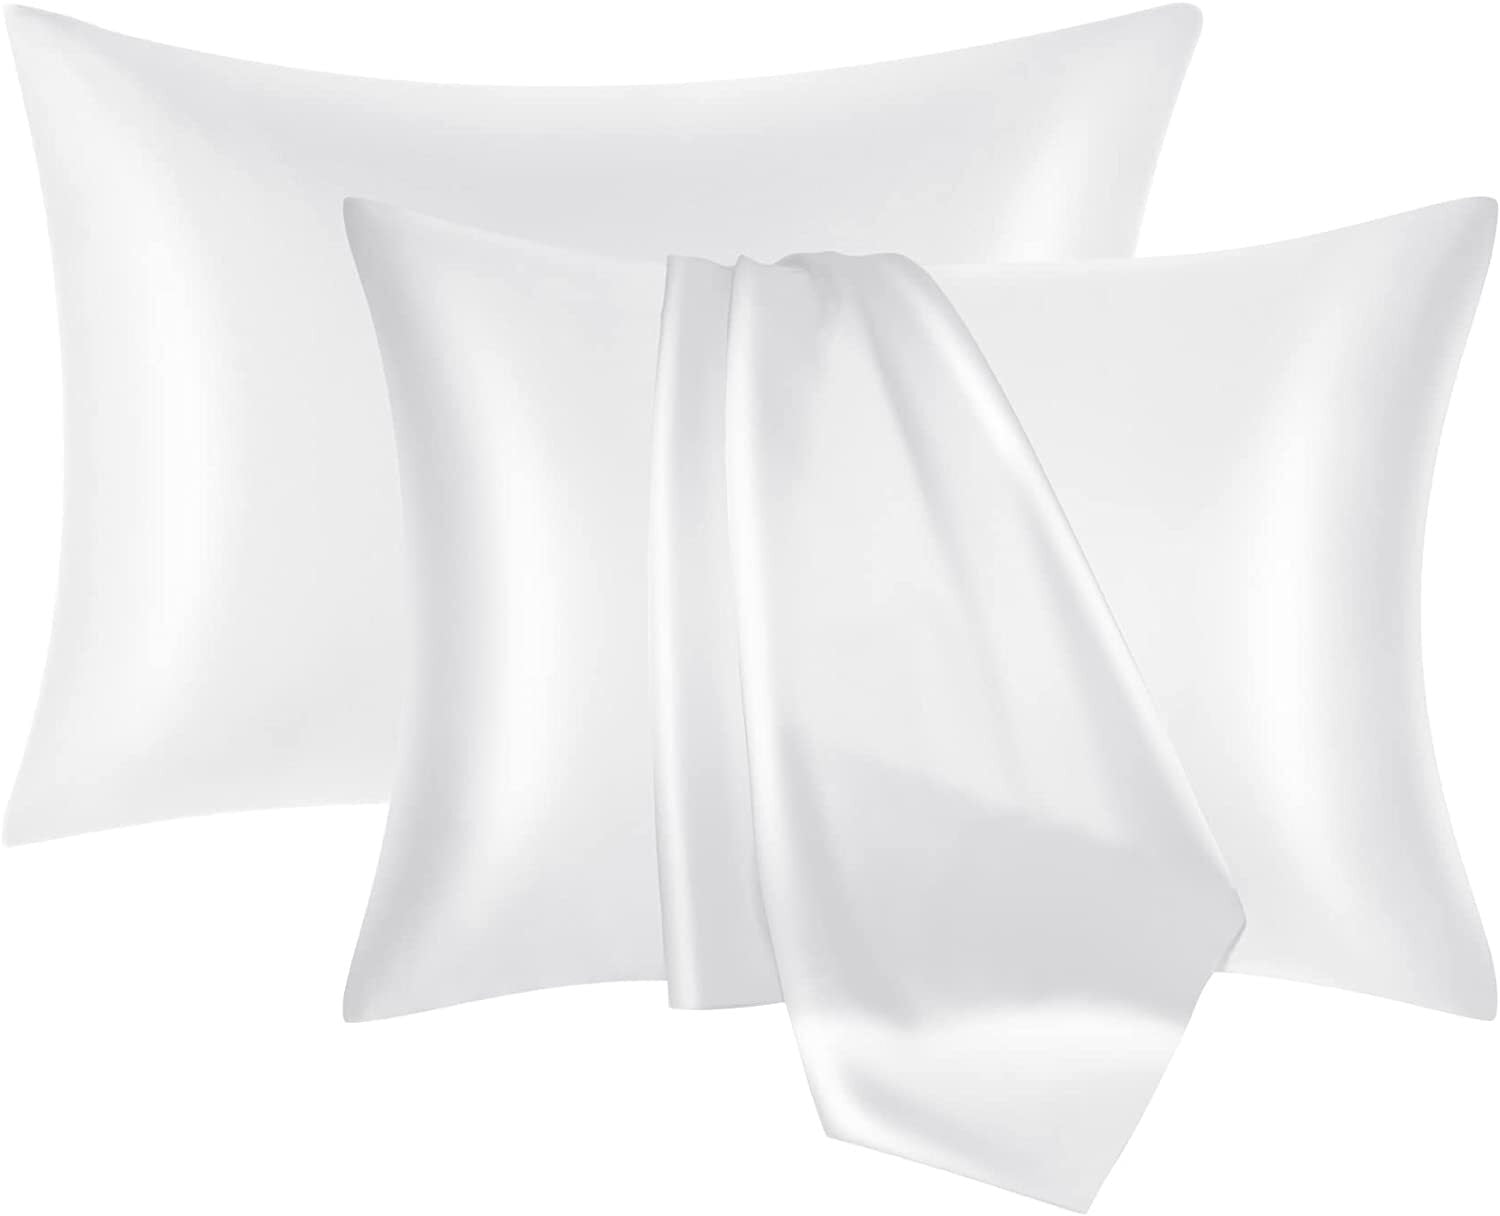 EHEYCIGA Satin Pillowcase for Hair and Skin Silk Pillowcase Set of 2 Rose  Tauge Soft Pillow Cases 2 Pack King Size 20X40 Inches